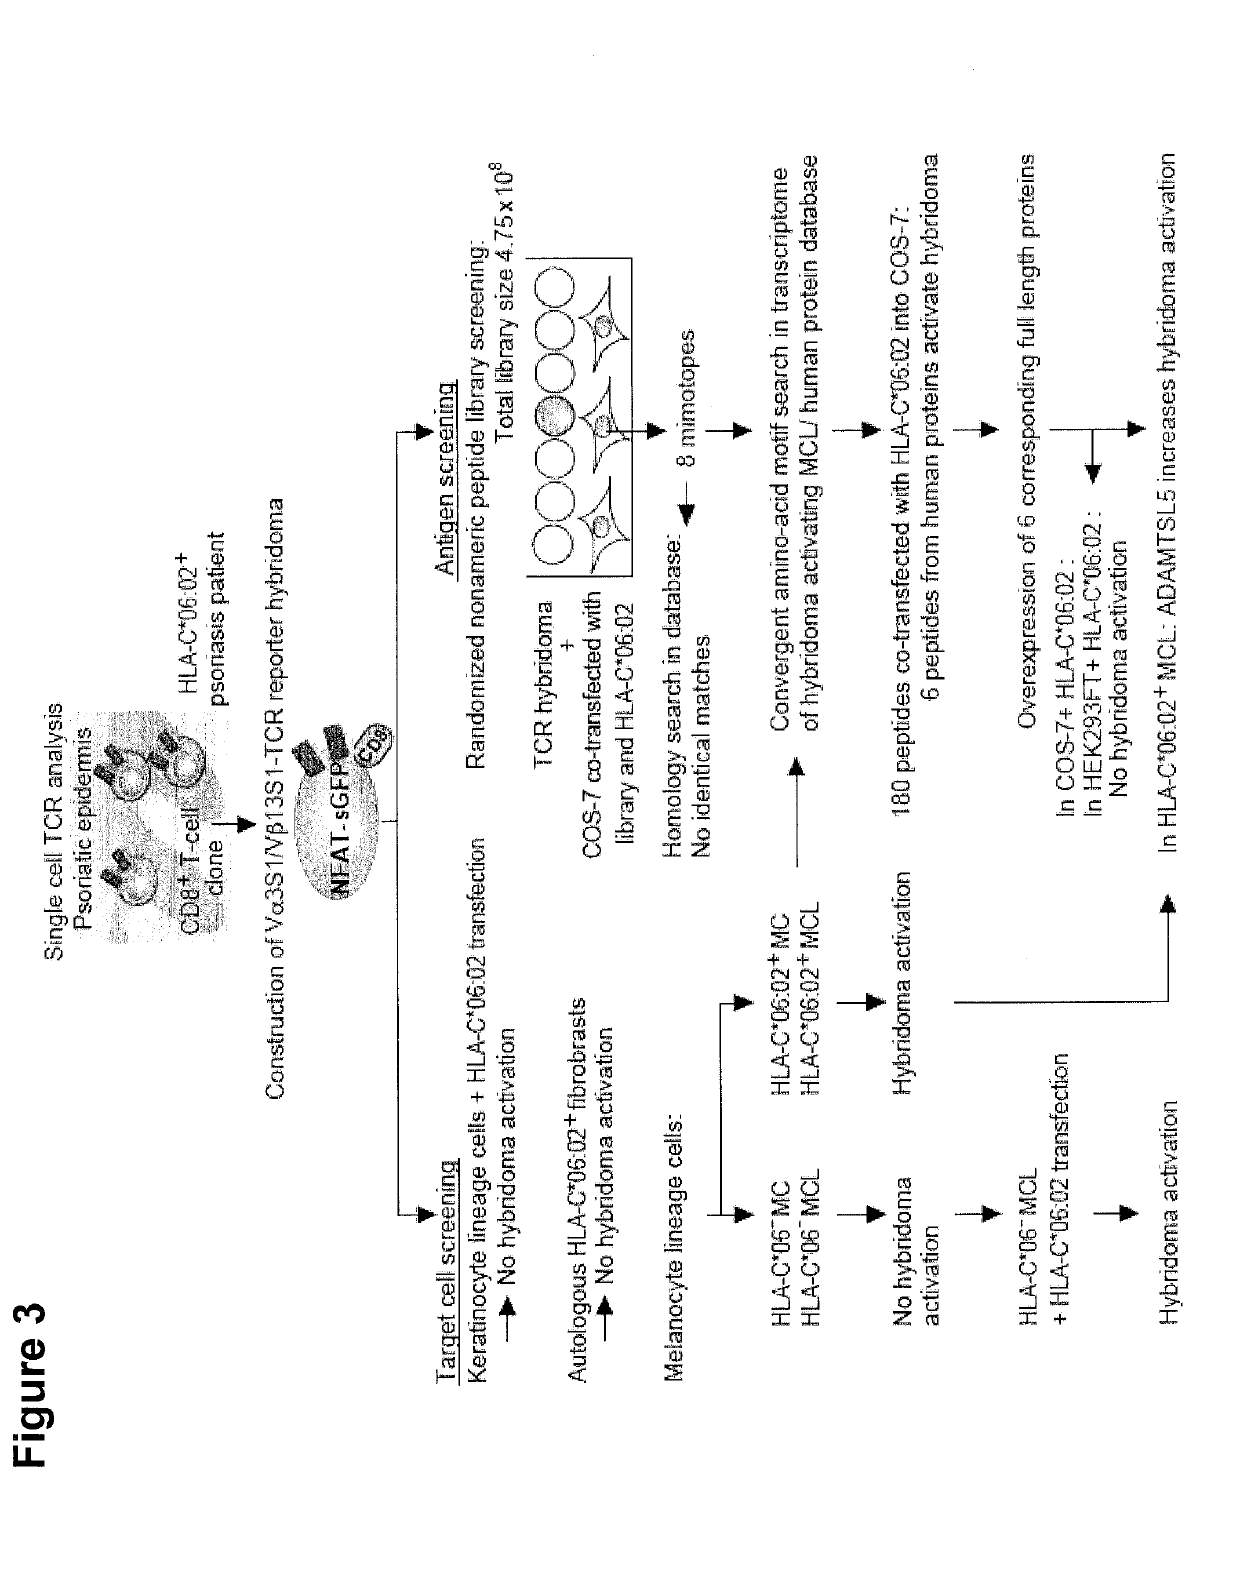 Antigenic peptides for the diagnosis, therapy monitoring and/or treatment of psoriasis vulgaris